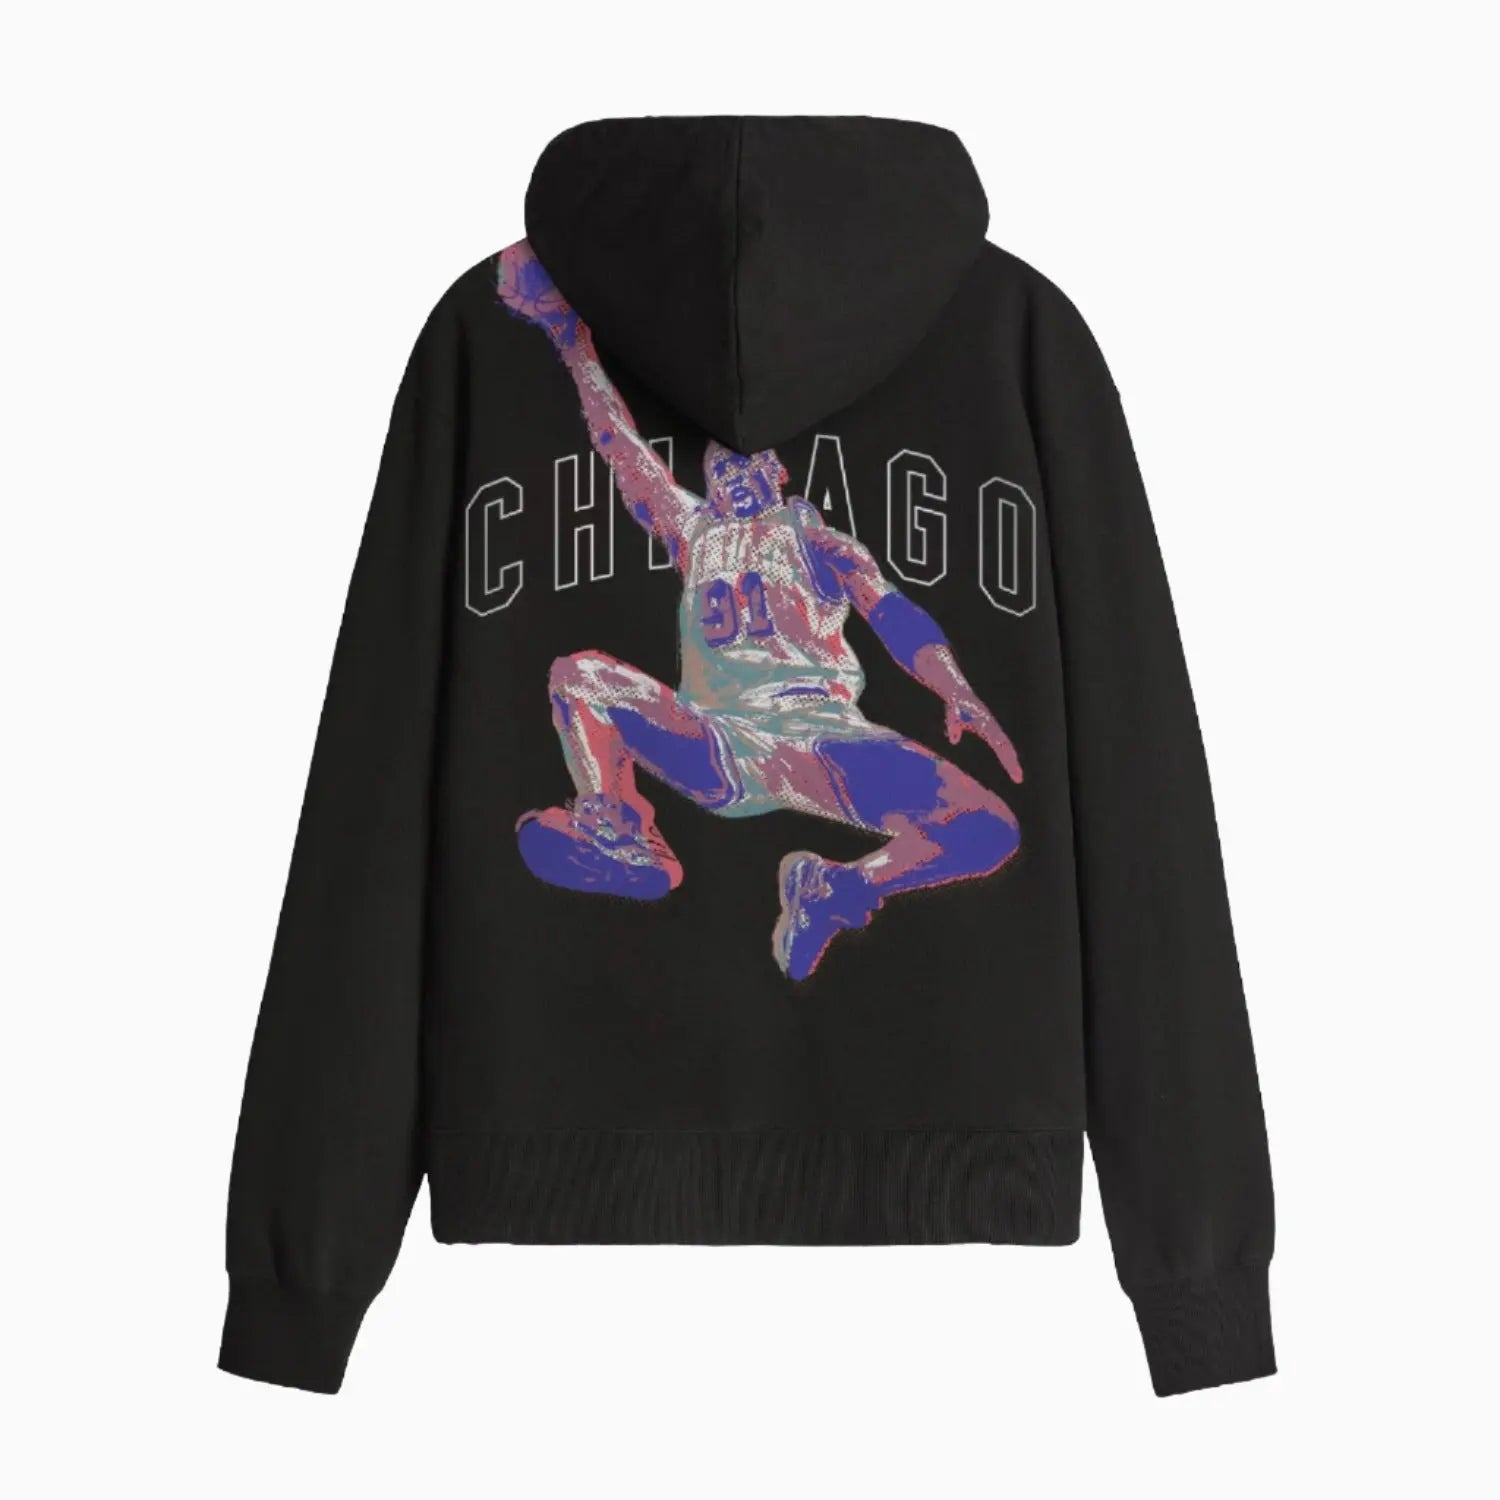 HOODIE OF MASK AND BLACK ROSES WITH LOGO ON THE BACK - IH NOM UH NIT